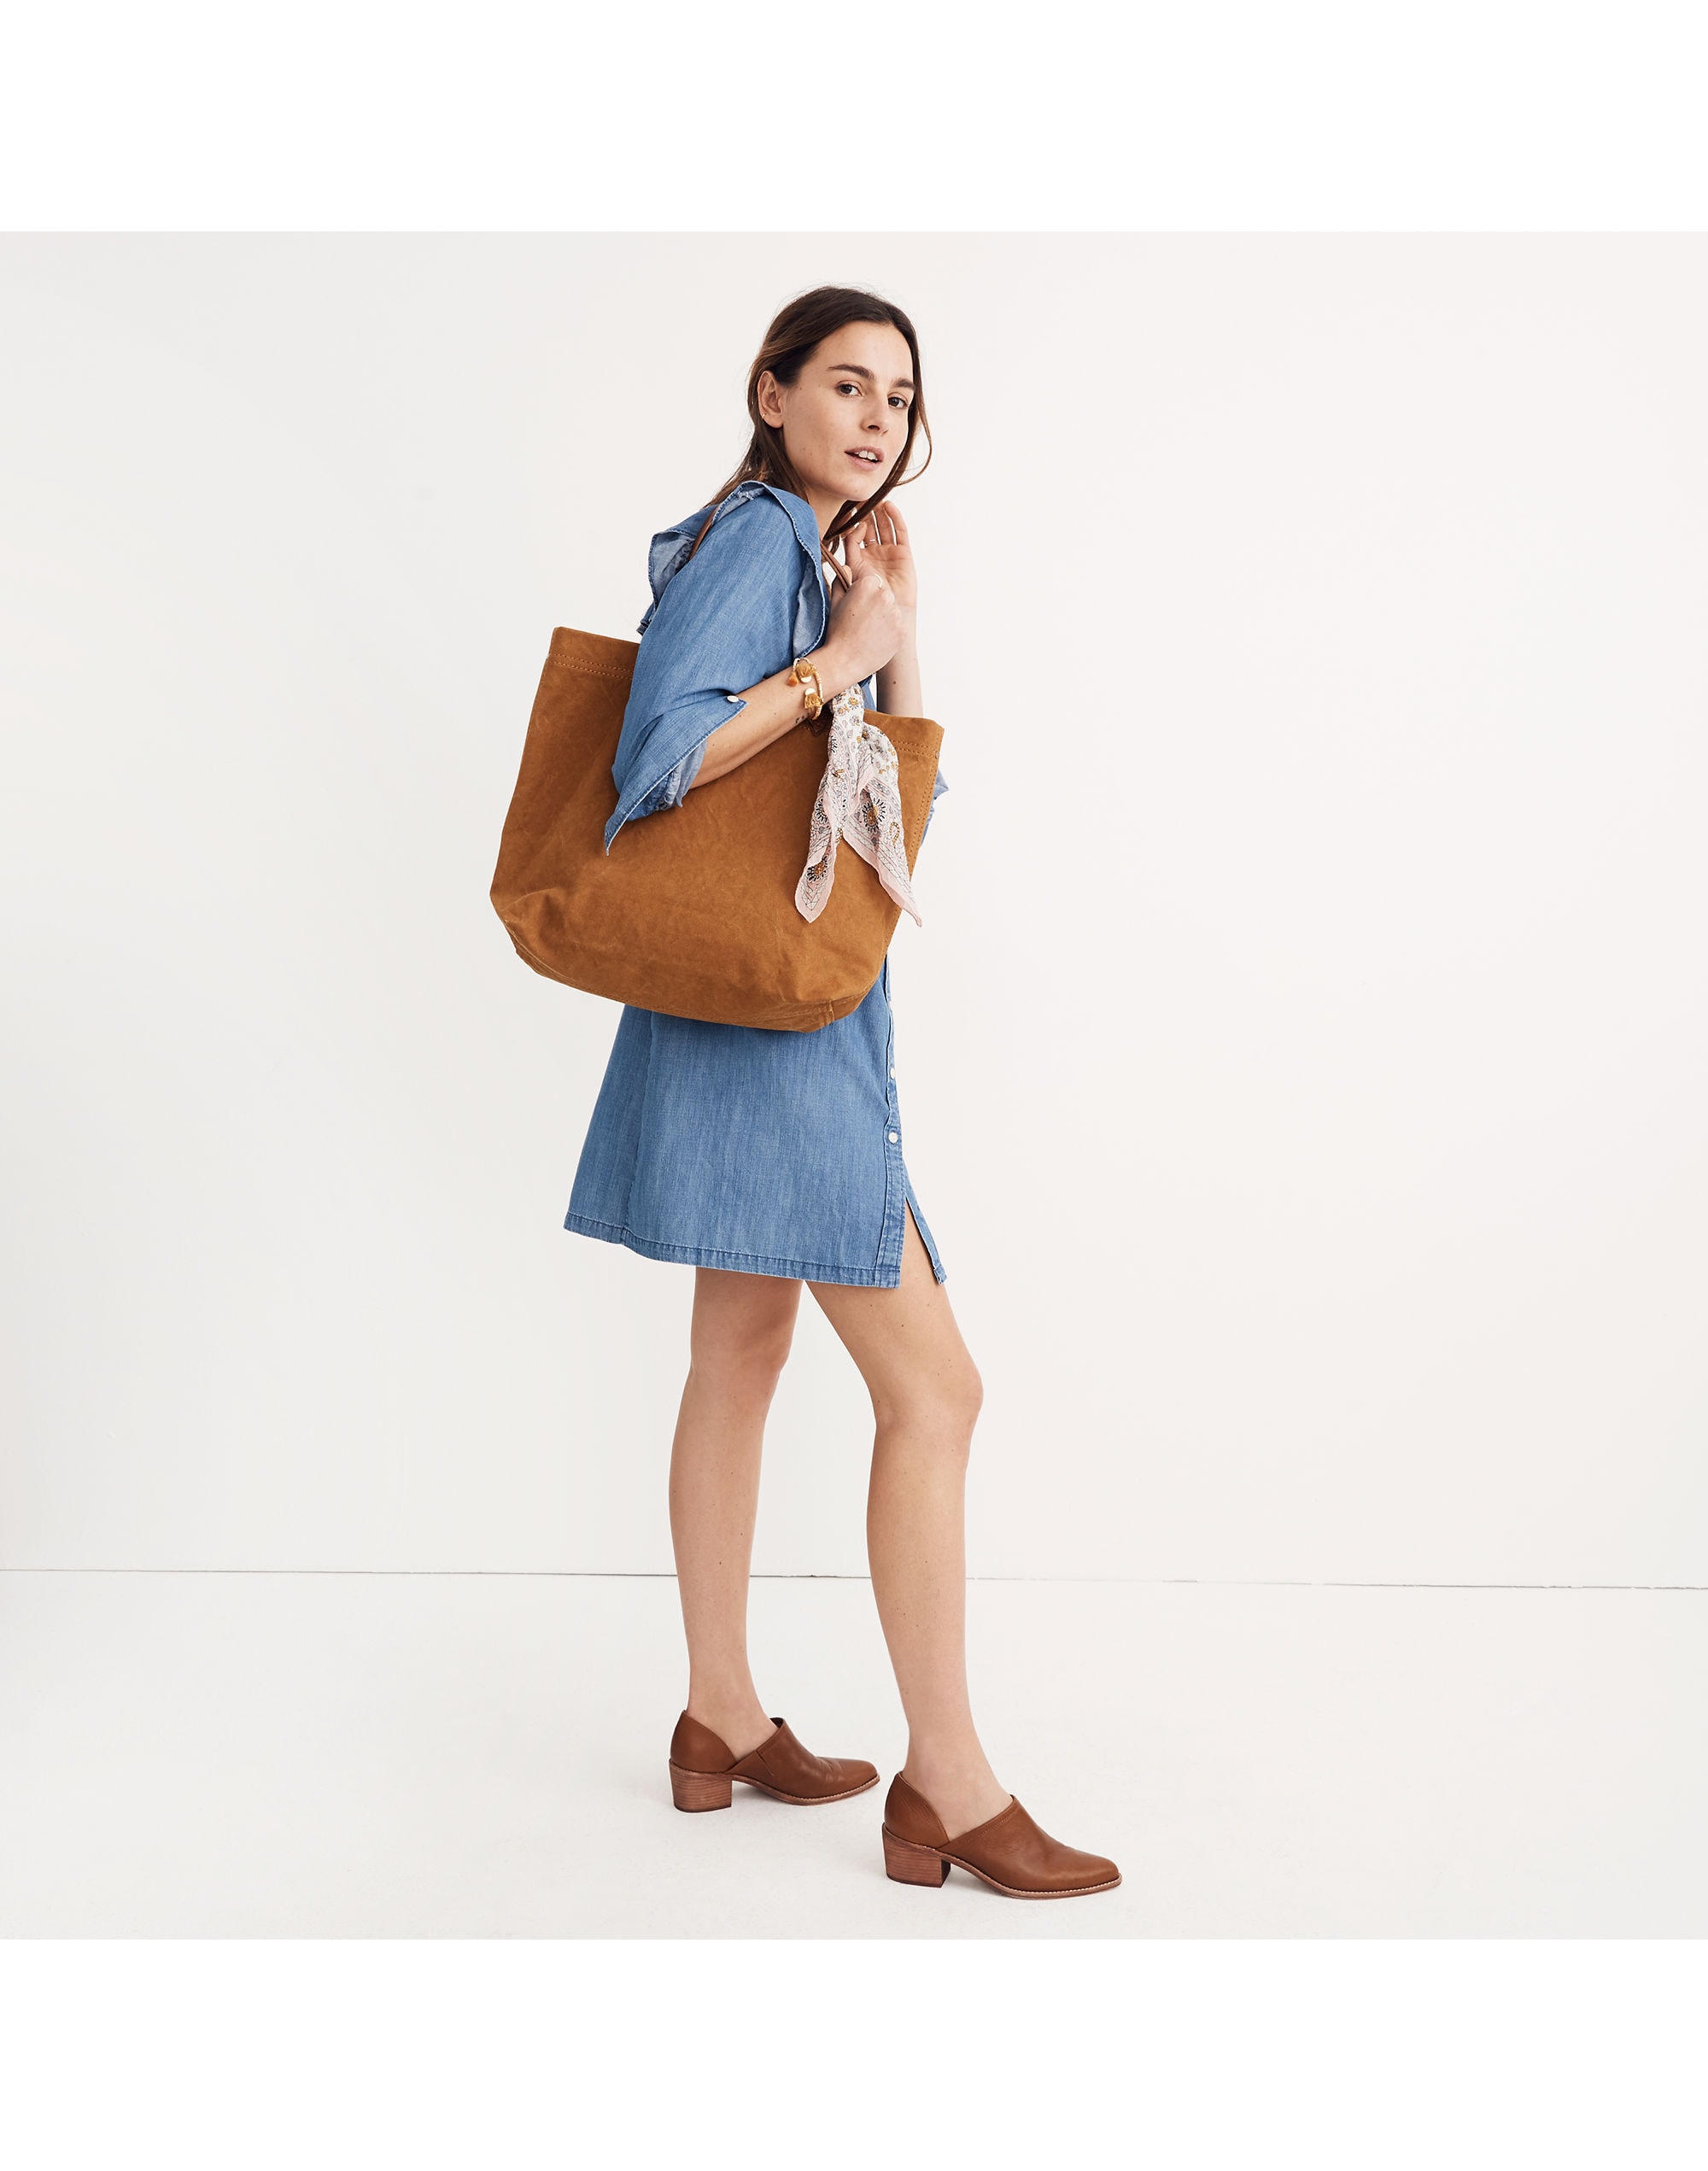 Madewell Canvas Transport Tote Sale 2020